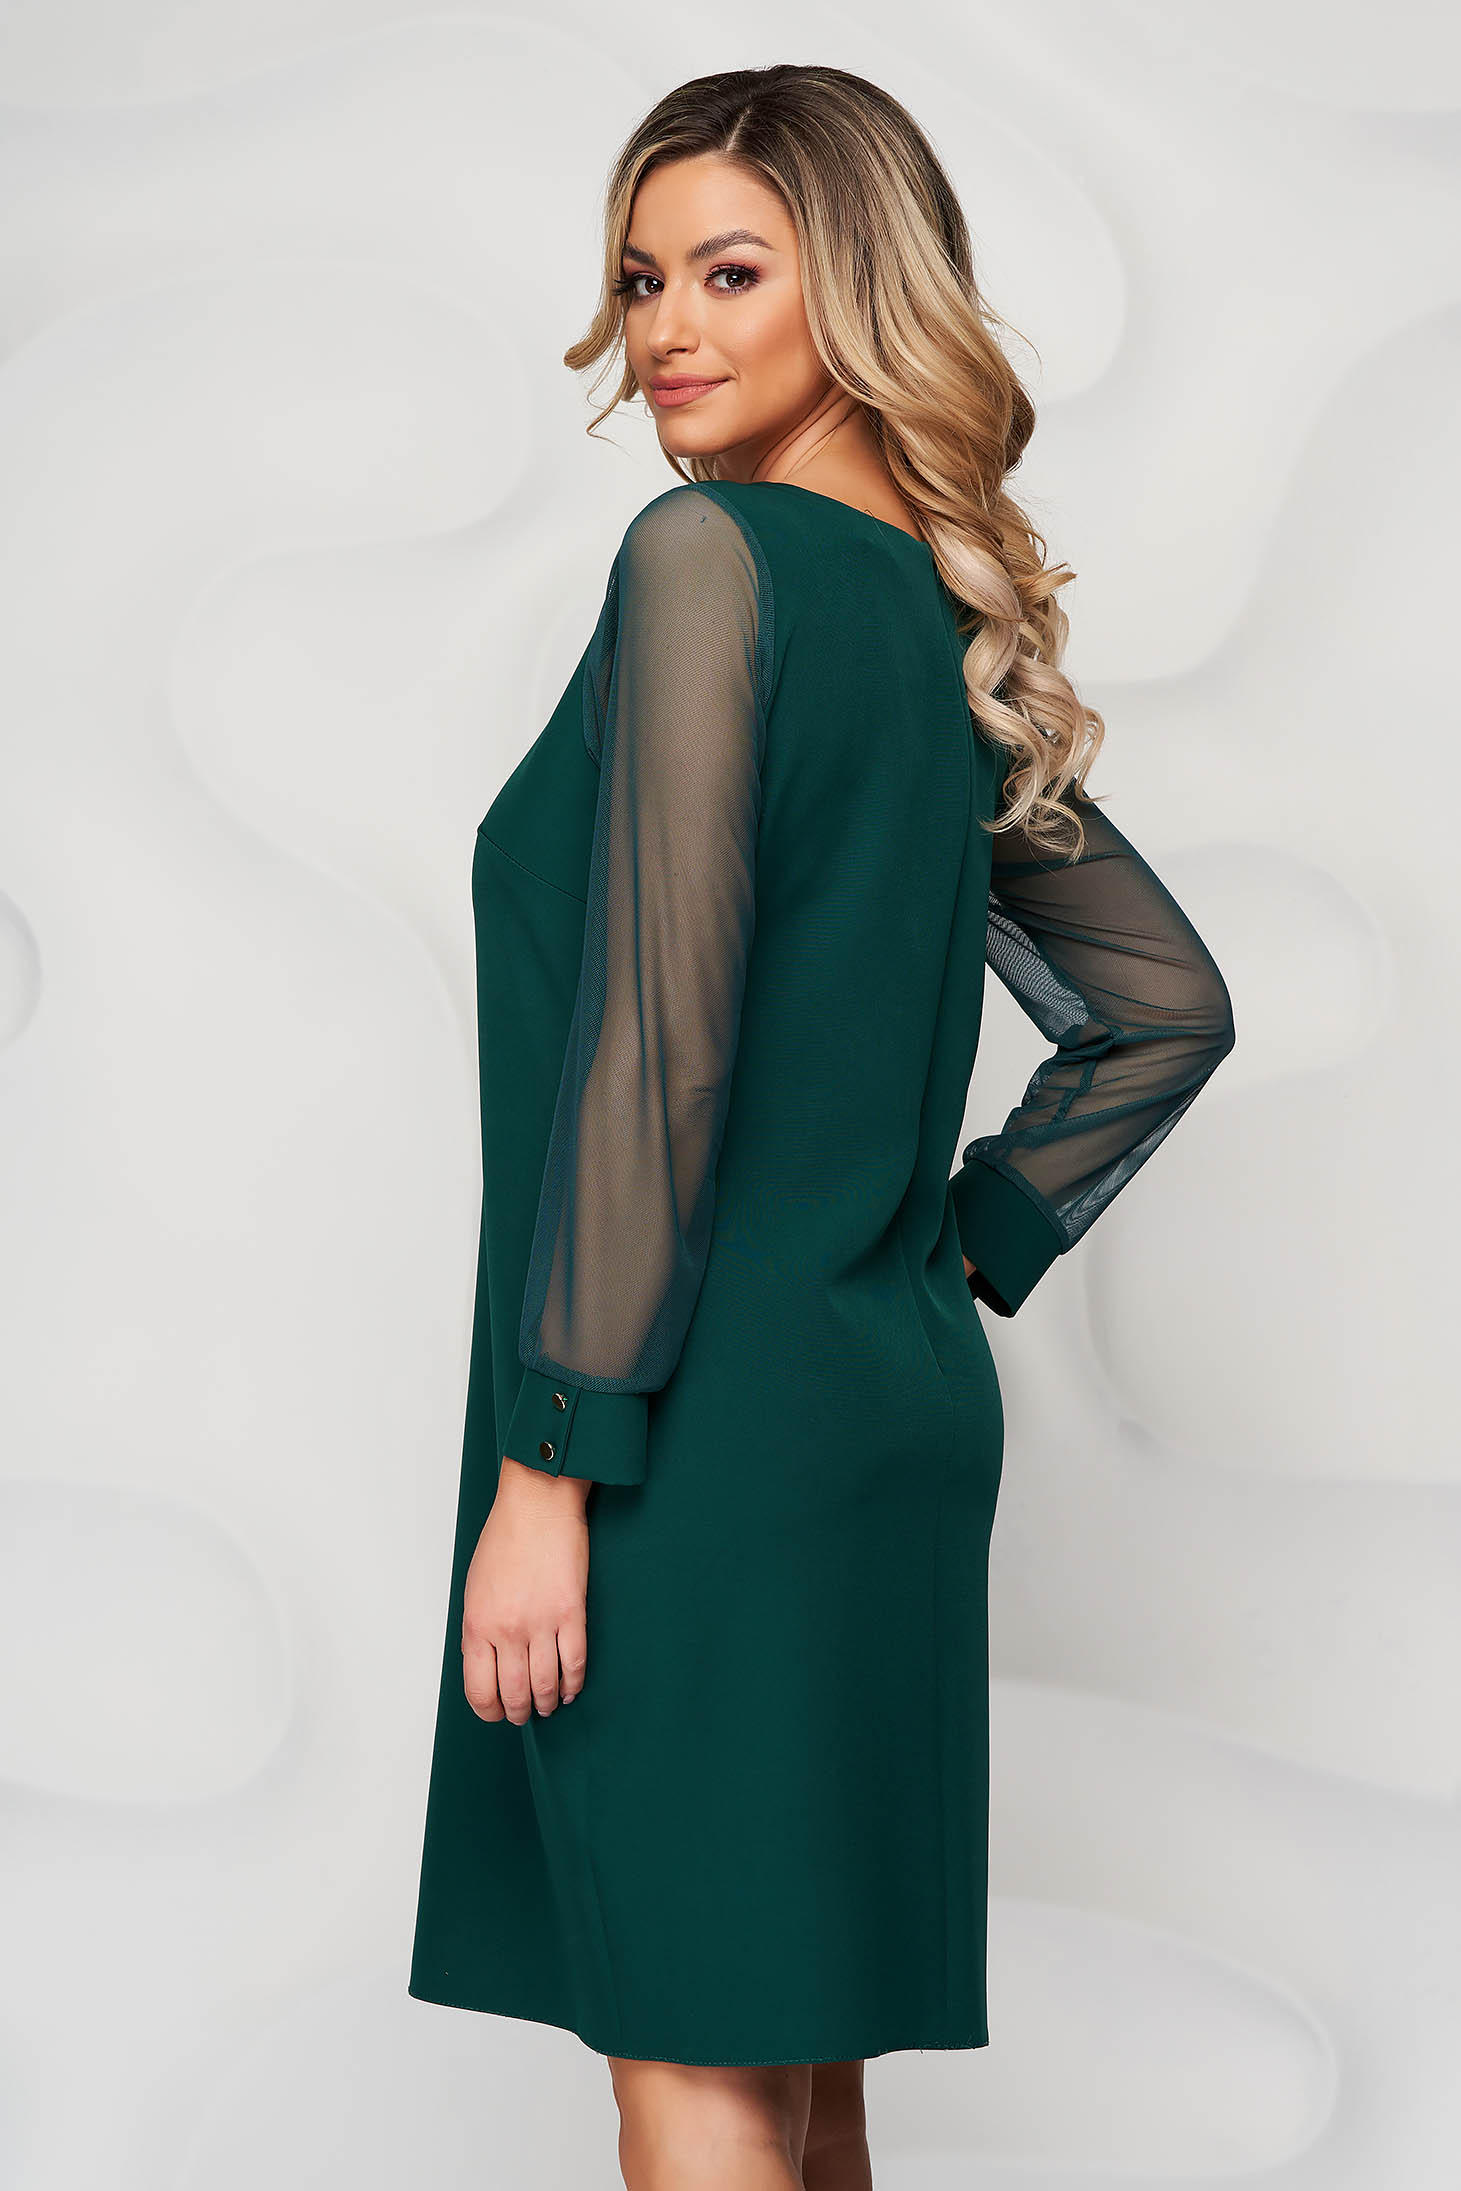 Green dress transparent sleeves with puffed sleeves straight from ...